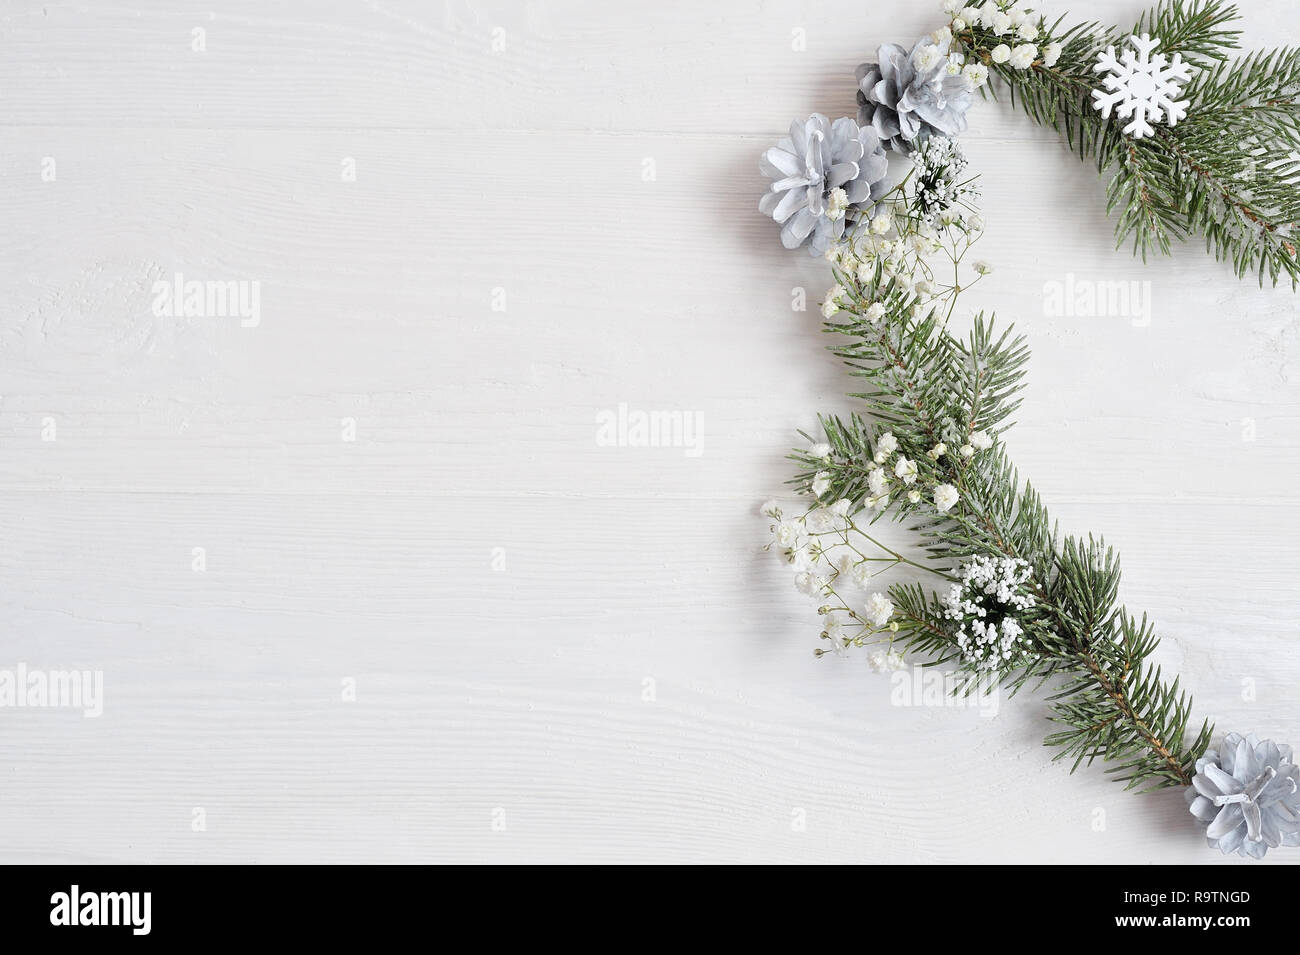 Mockup of Christmas Wreath in form of heart Decorated with white snowflakes and cones. On white wooden background Stock Photo